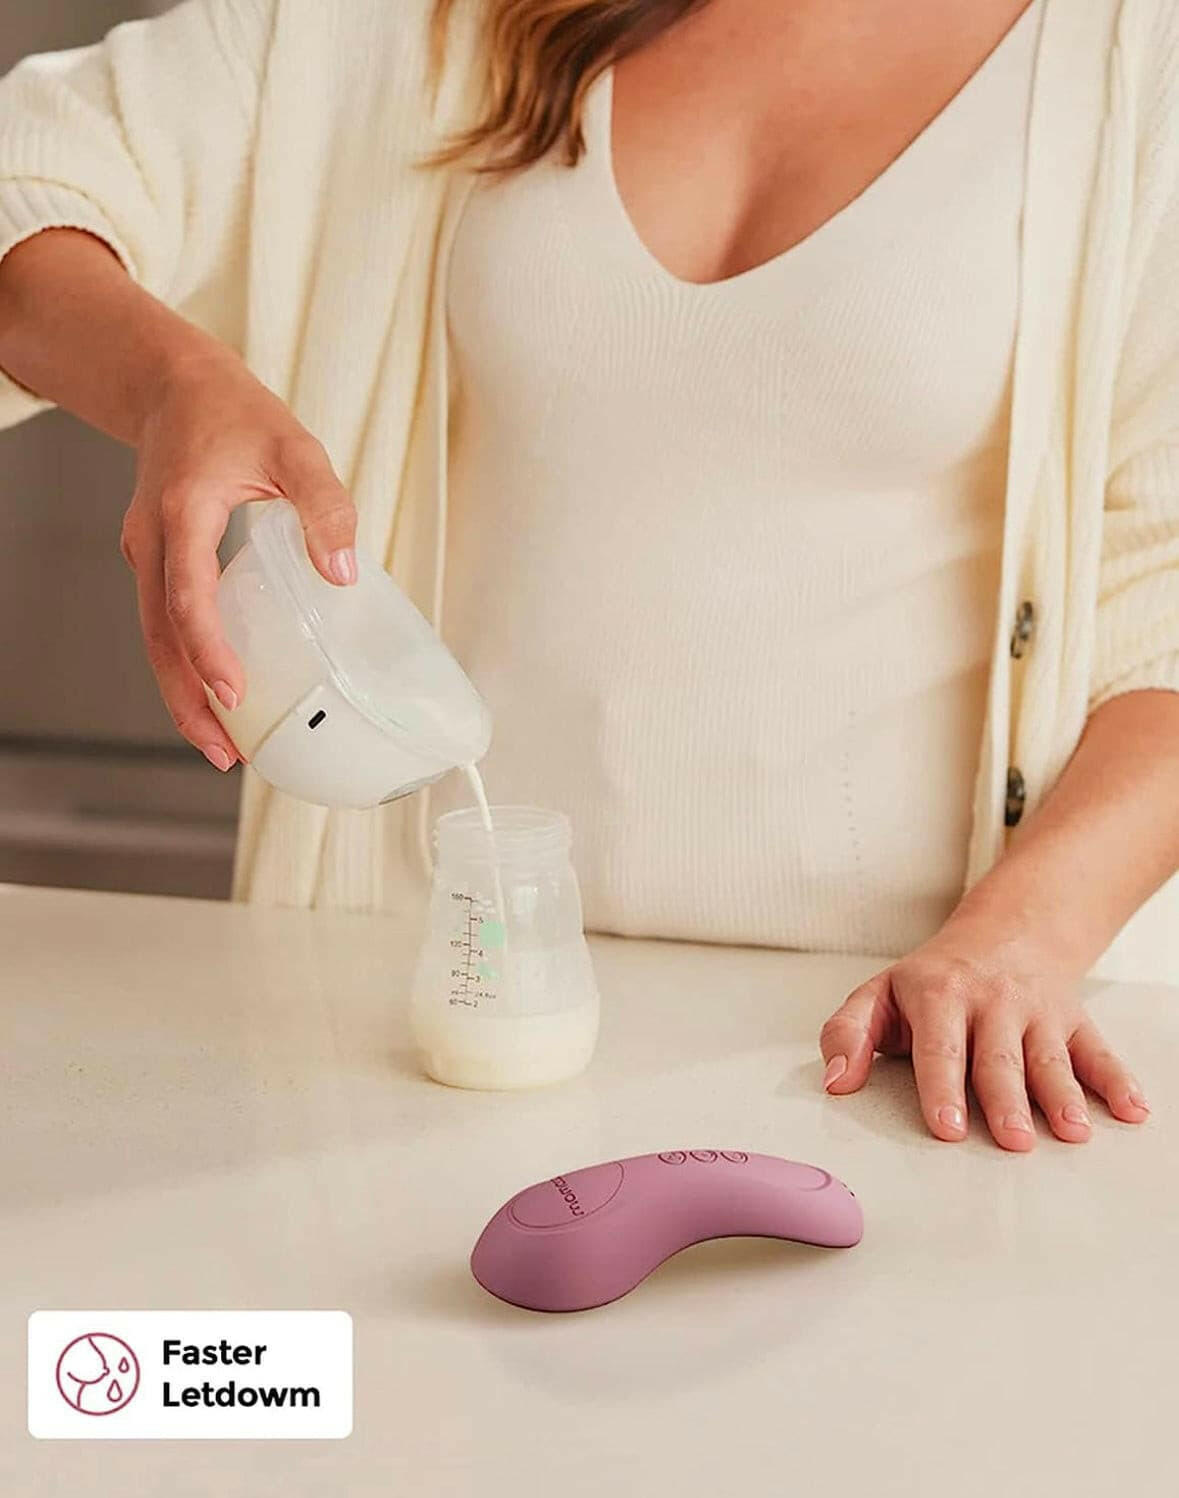 Momcozy Kneading Lactation Massager with Heat, 3-in-1 Real-Like Massage for Relieve Clogged Ducts.